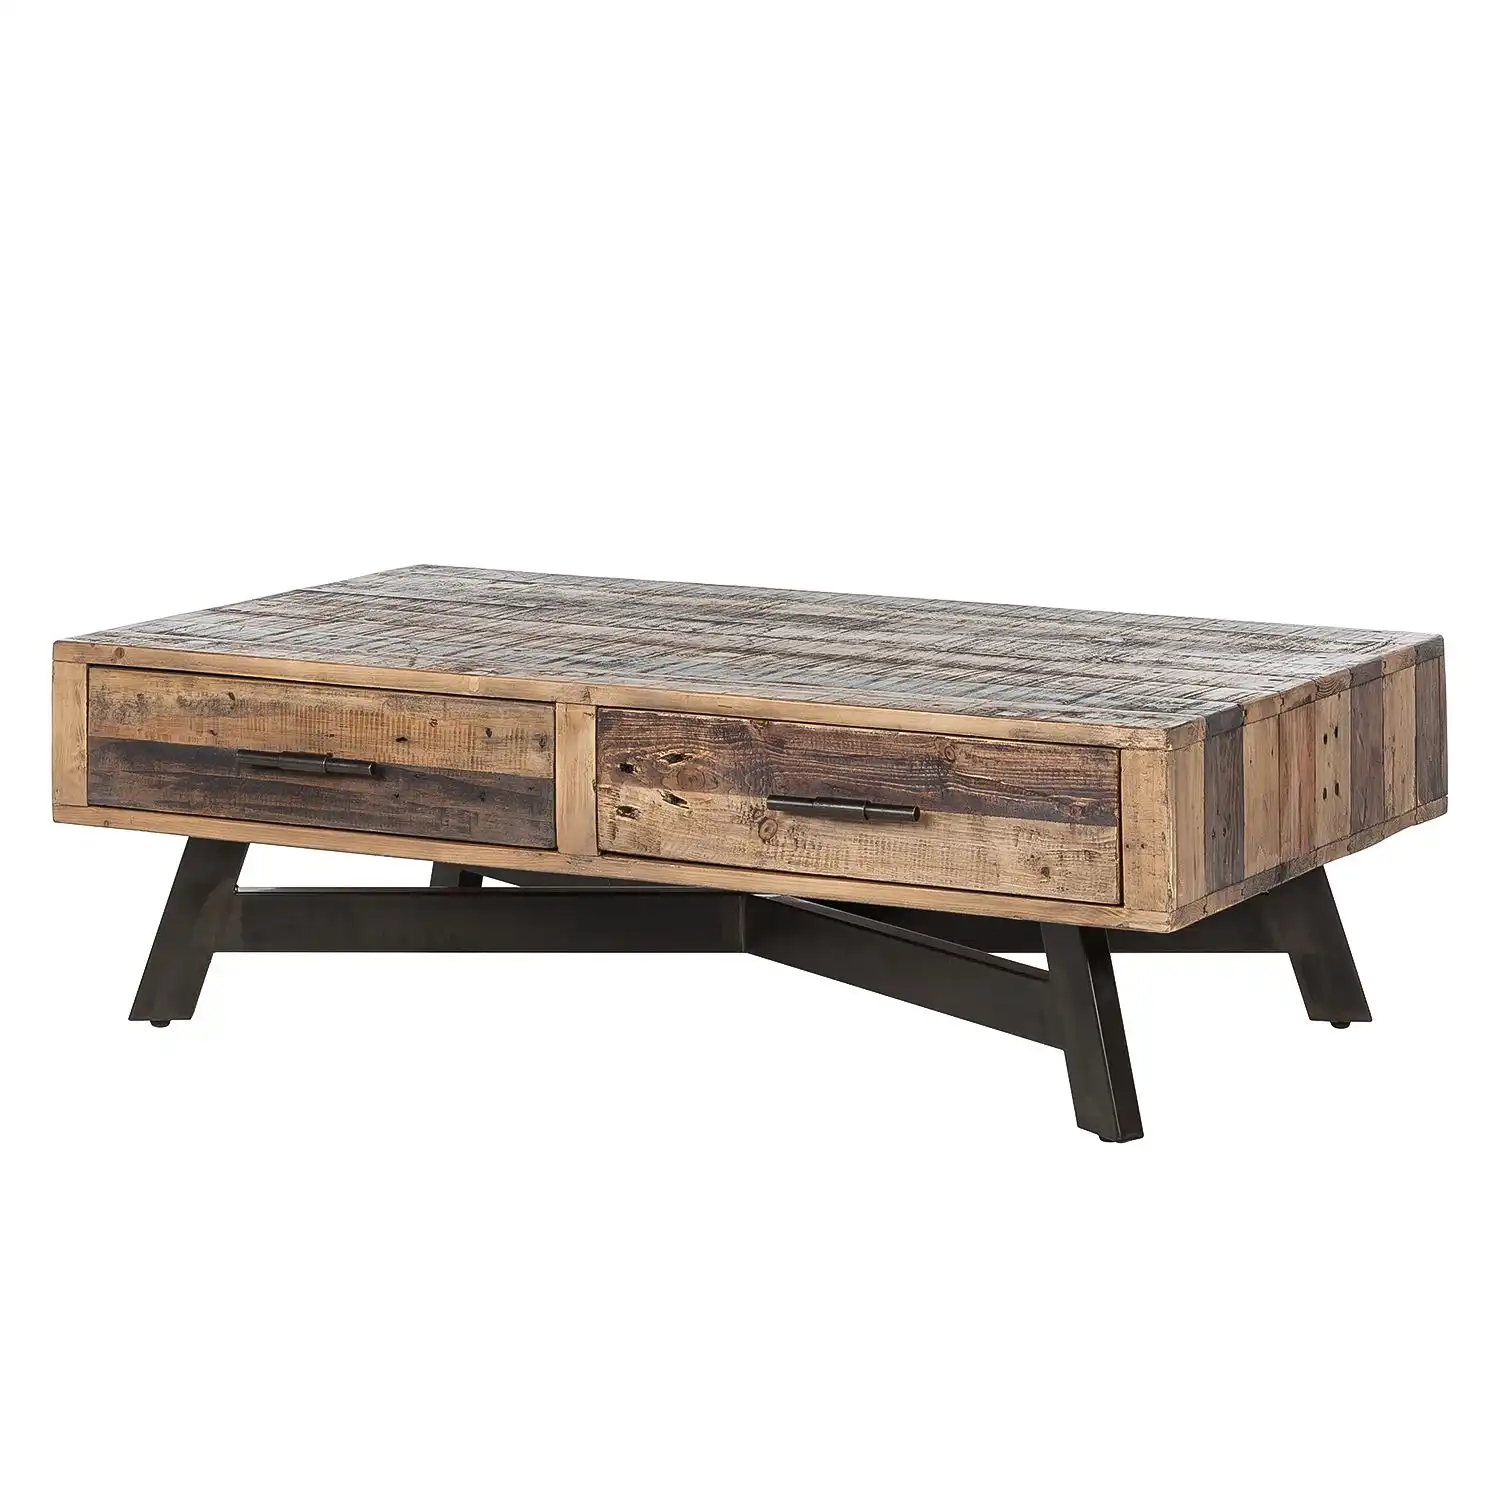 Reclaimed Wood Coffee Table with 2 drawers - popular handicrafts